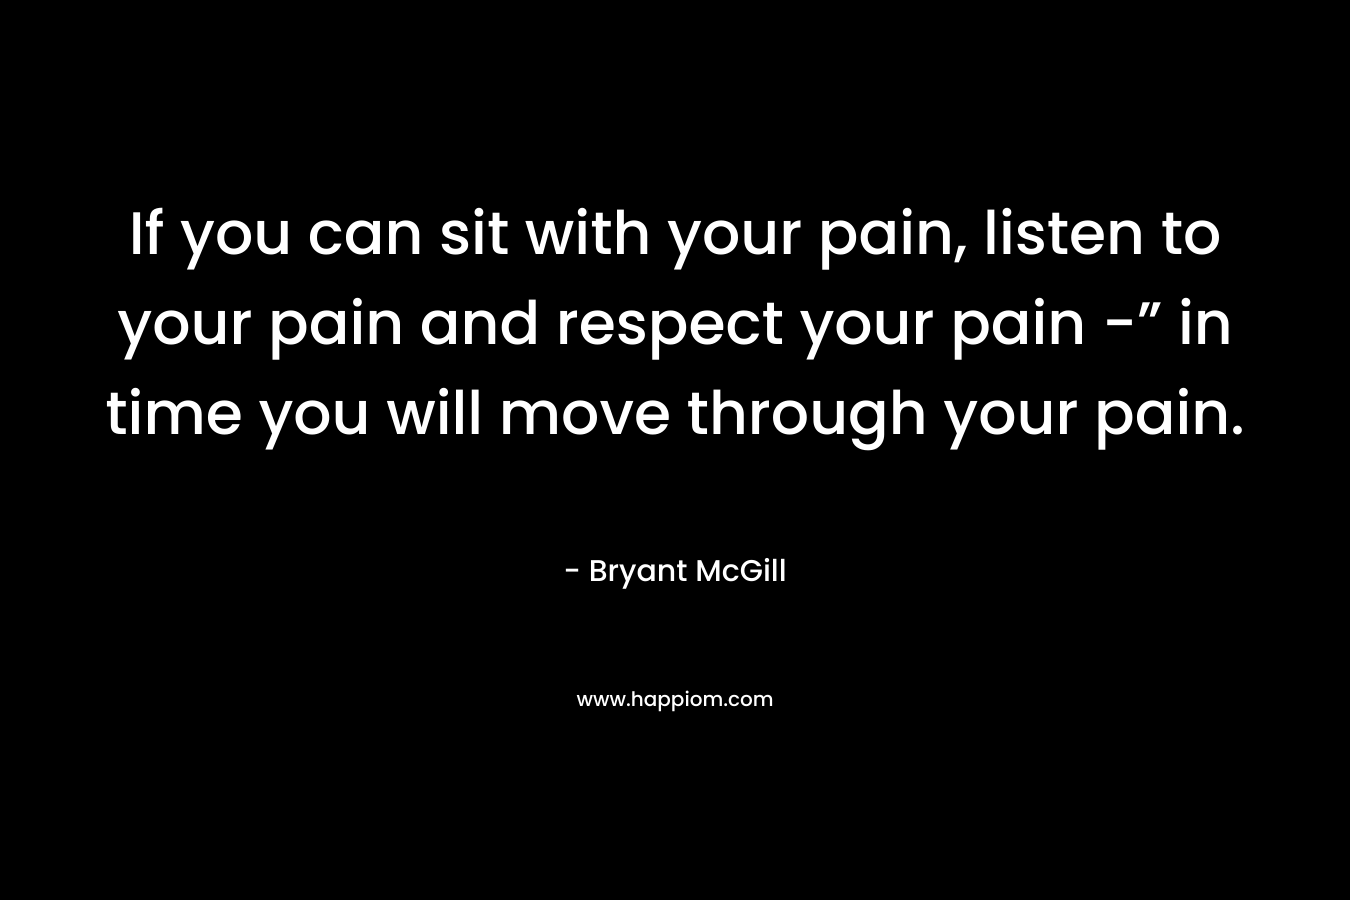 If you can sit with your pain, listen to your pain and respect your pain -” in time you will move through your pain.